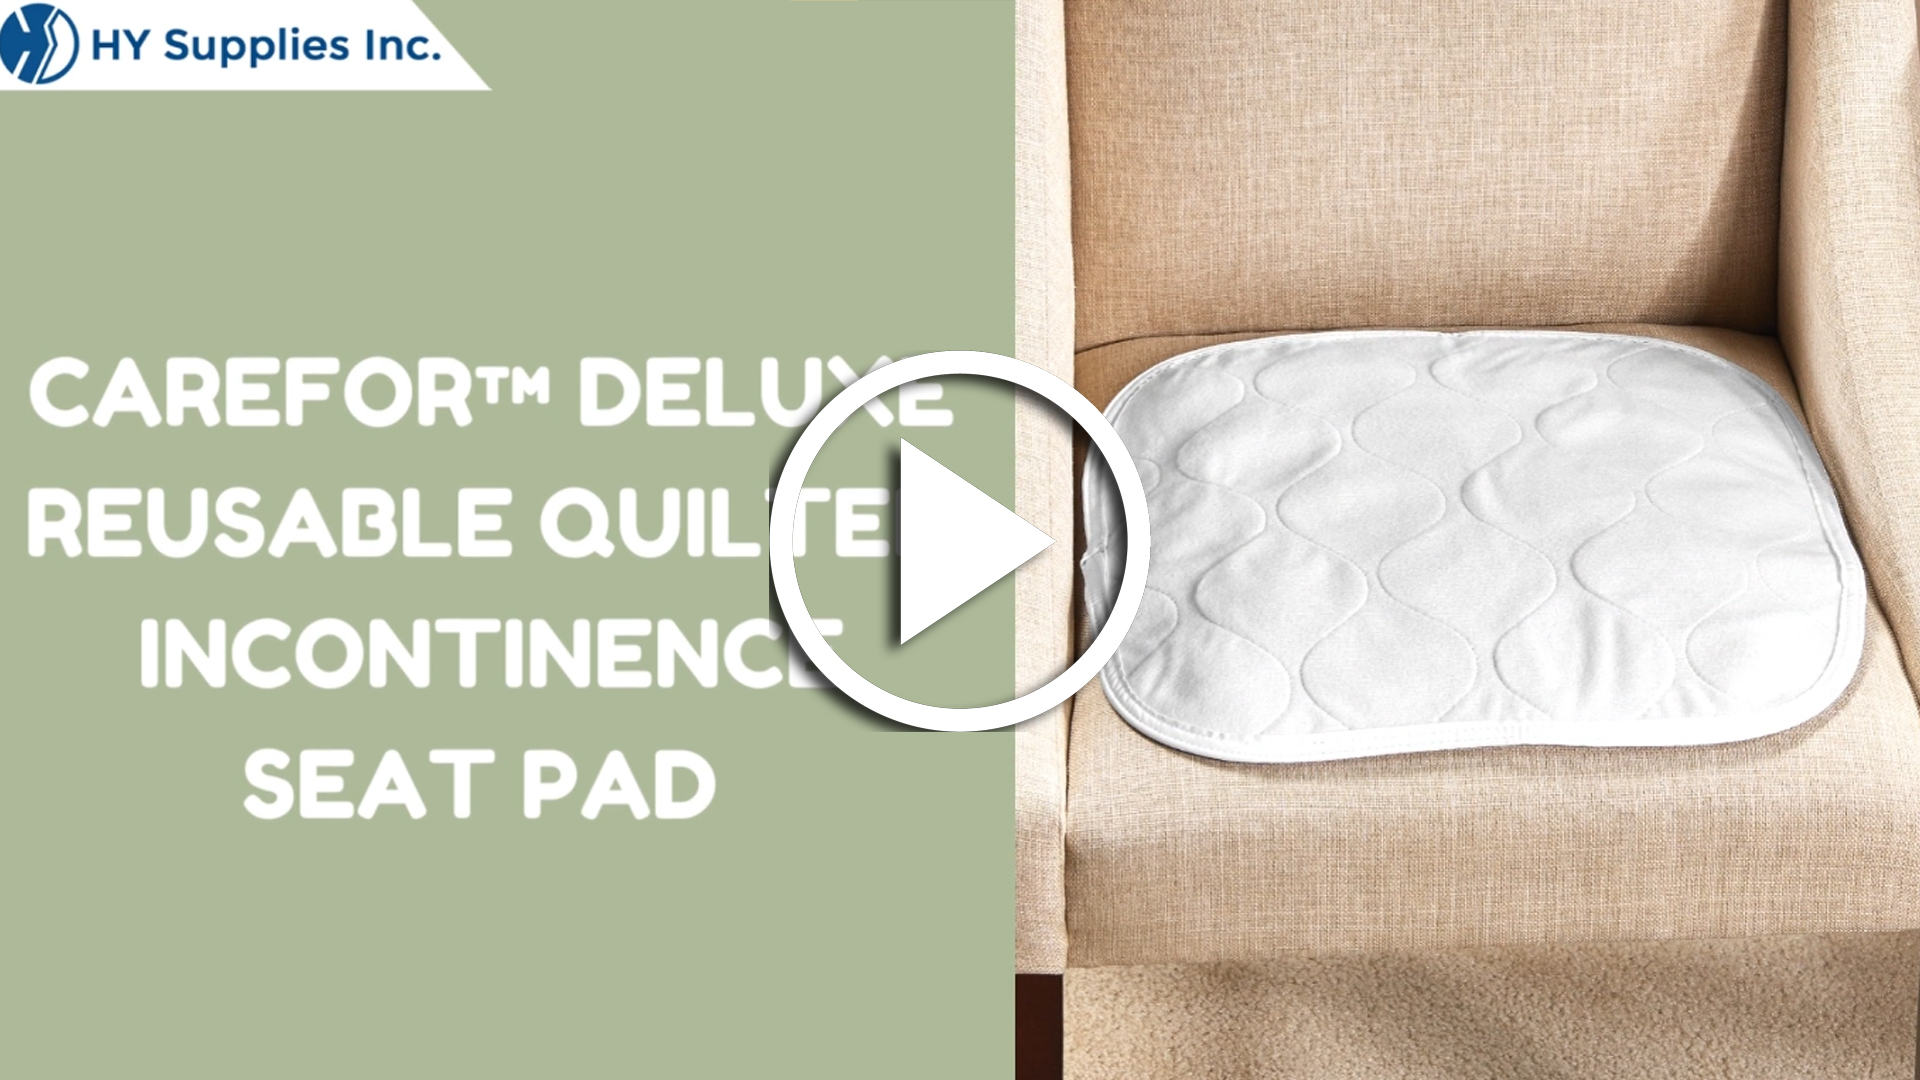 CareFor™ Deluxe Reusable Quilted Incontinence Seat Pad